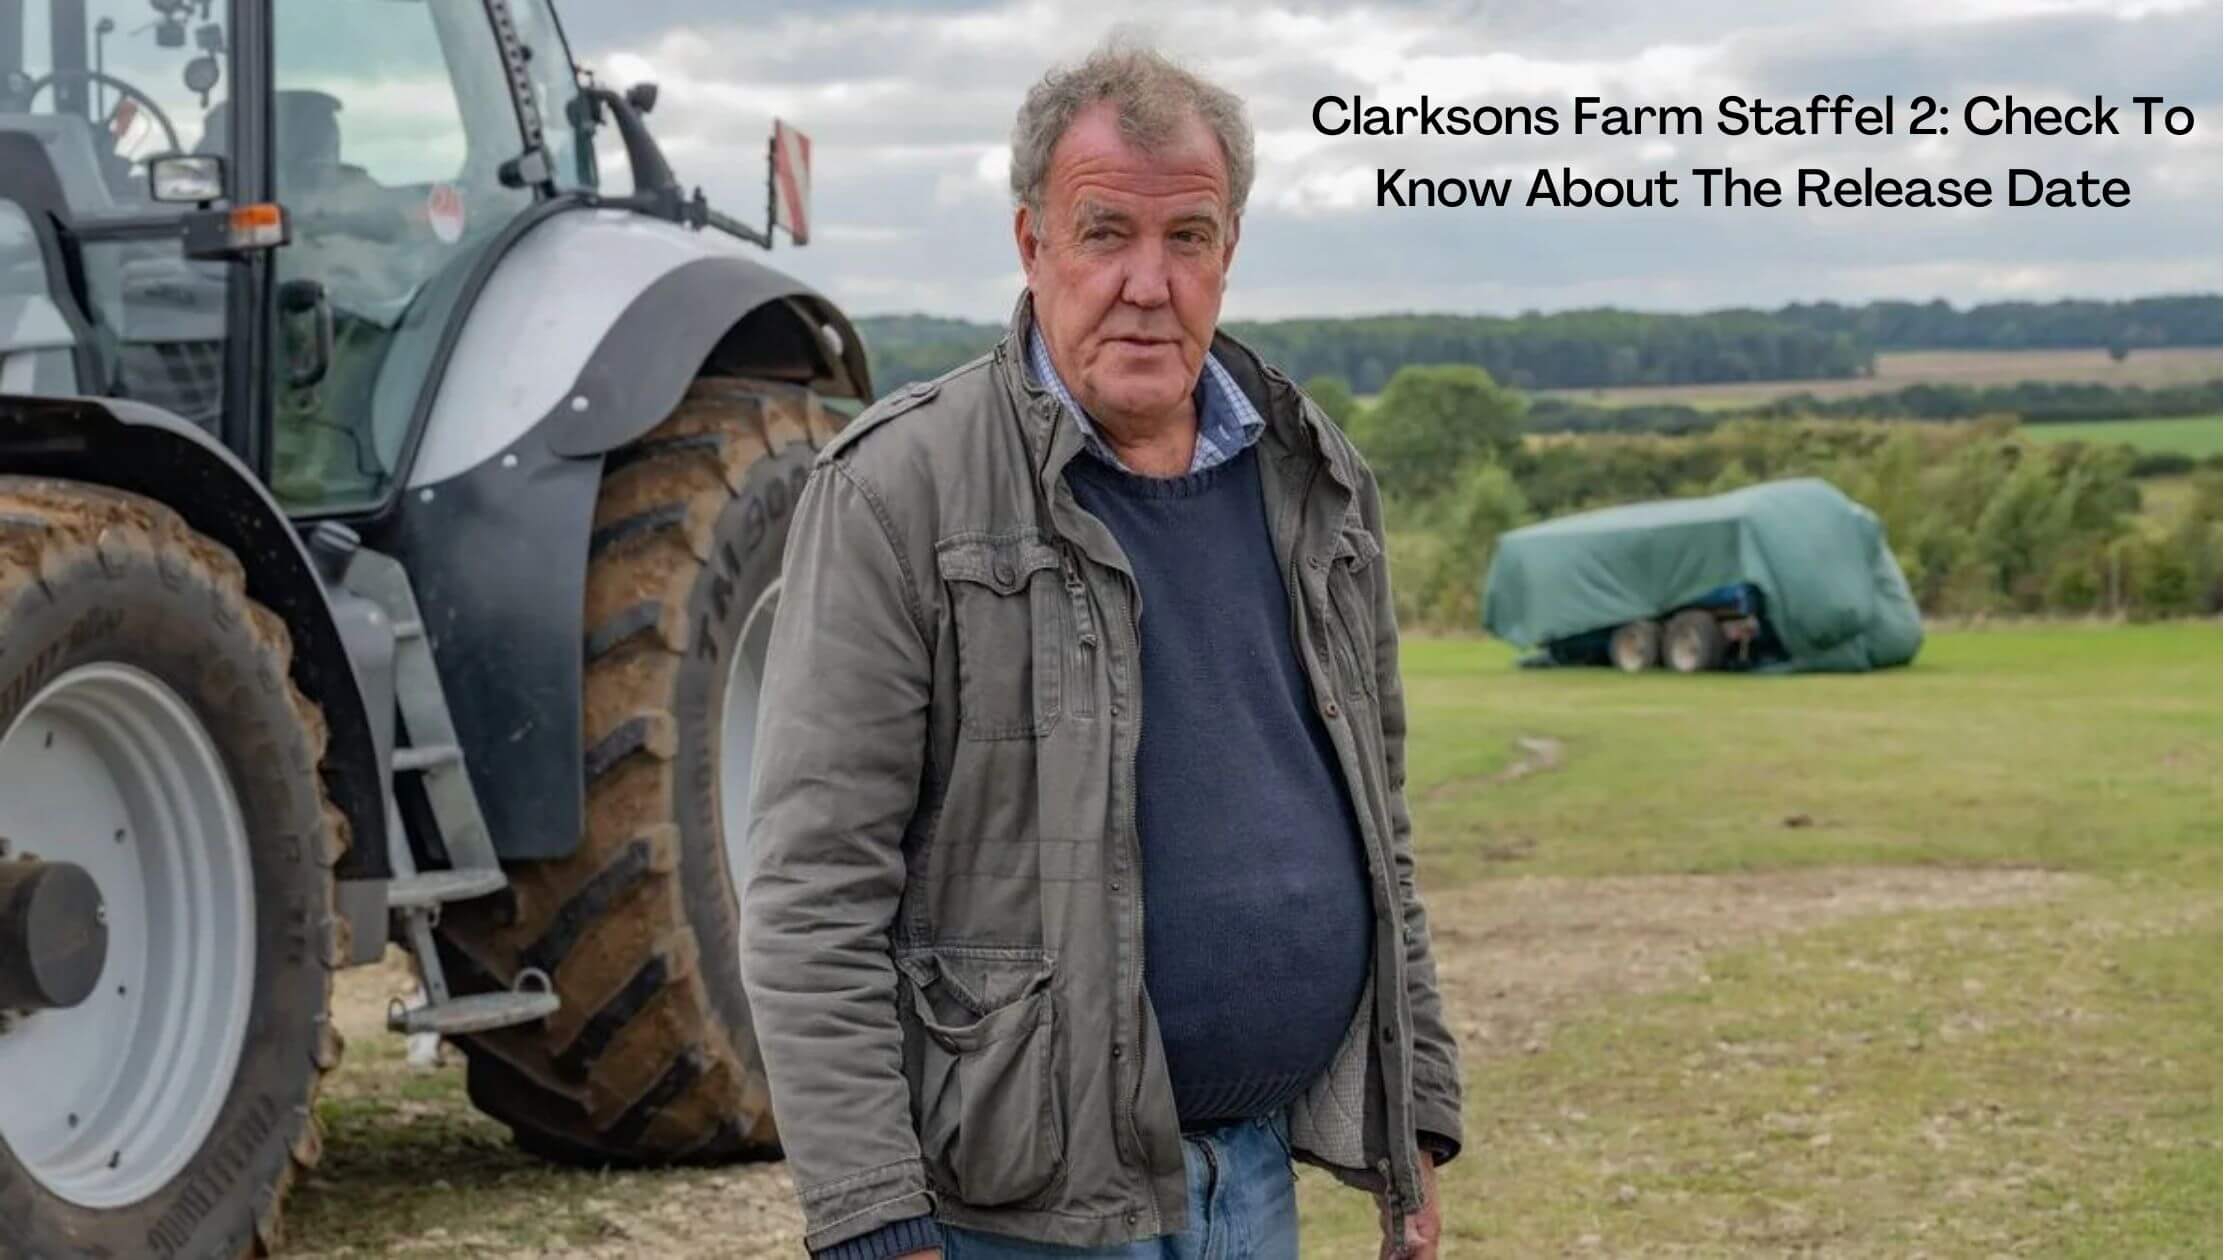 Clarksons Farm Staffel 2 Check To Know About The Release Date